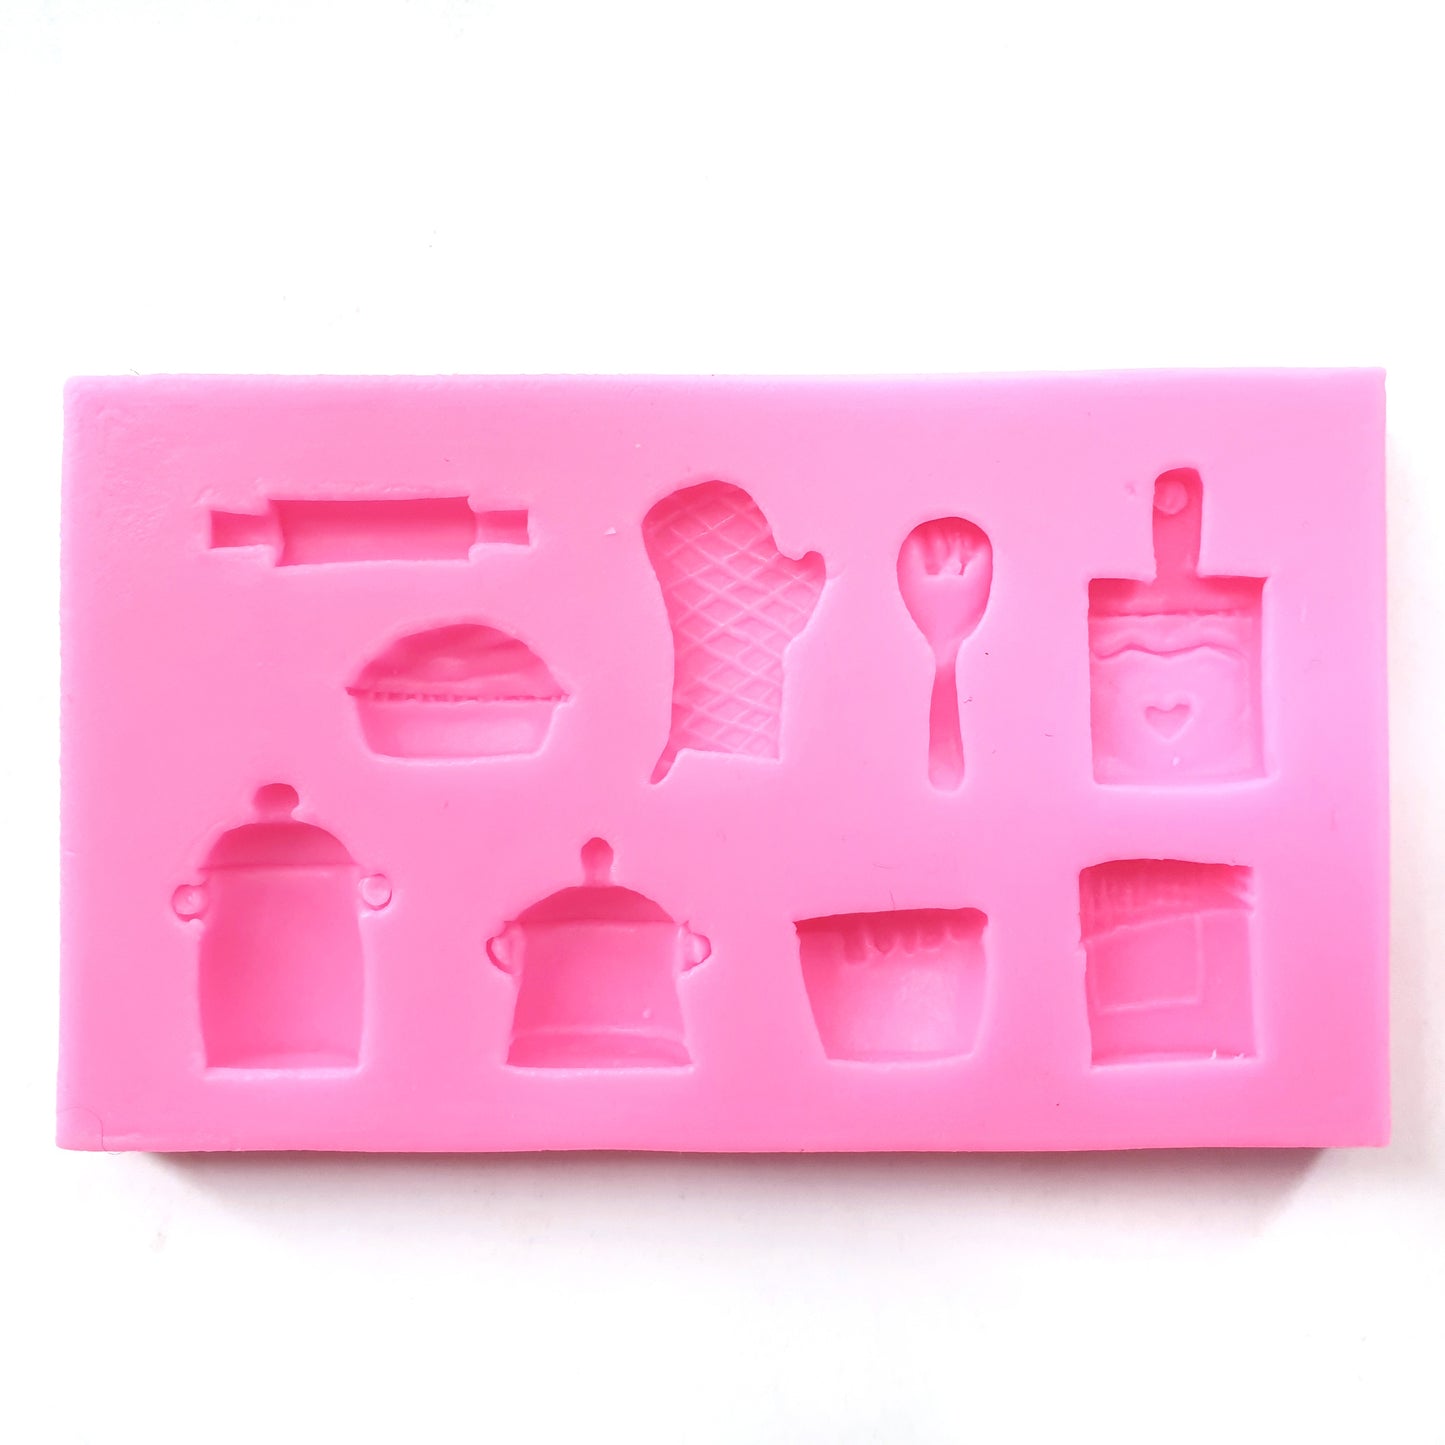 Baking-themed silicone mould